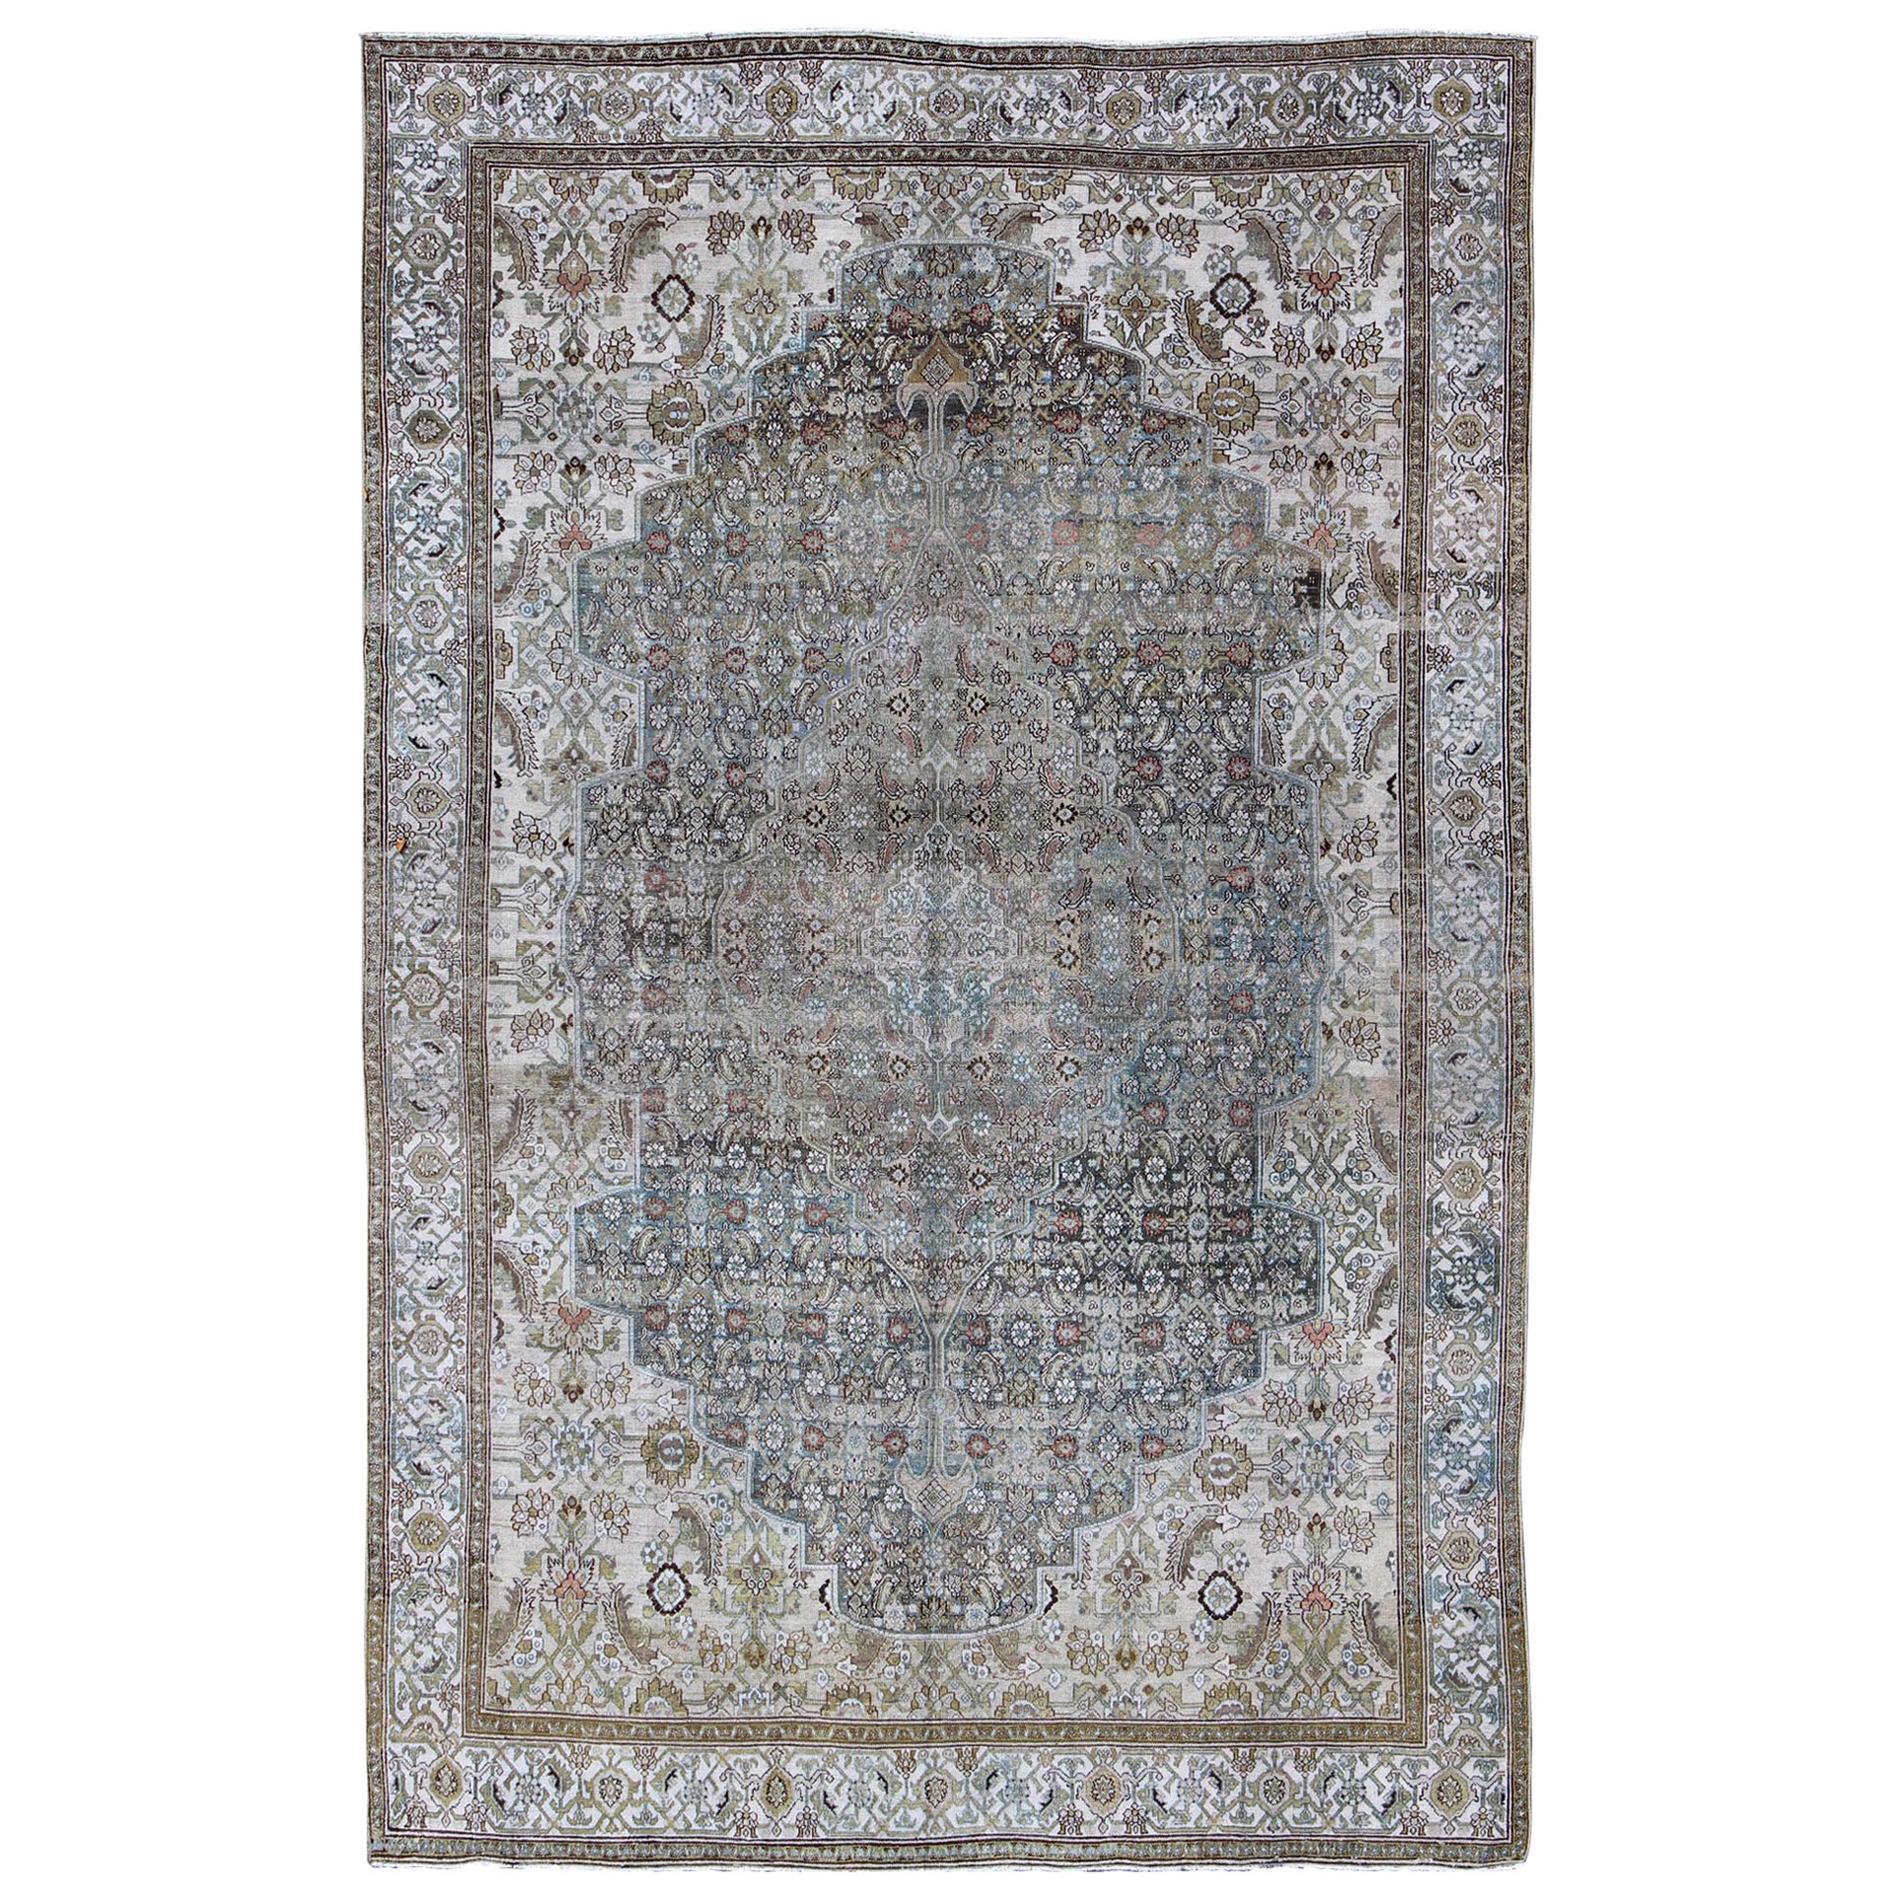 Steel Blue and Taupe Antique Persian Malayer Rug with Medallion Design